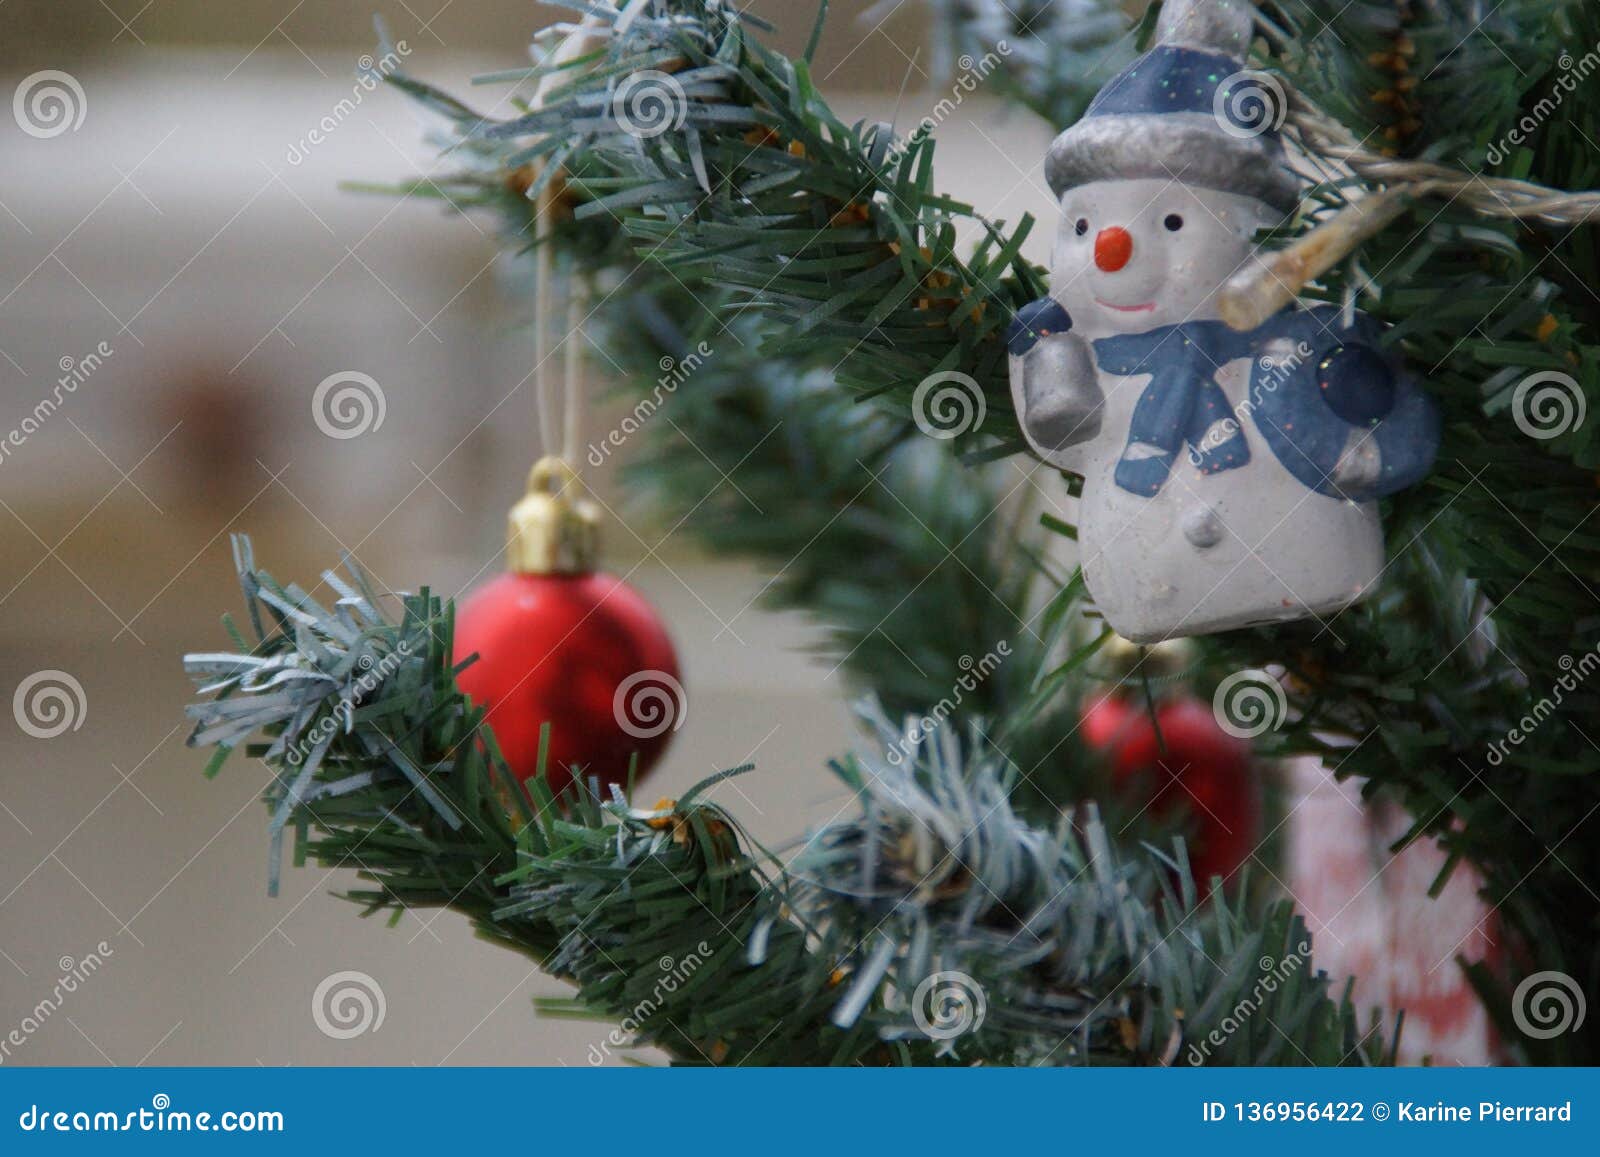 All Magic Of Christmas The Tree And Its Decorations Stock Photo